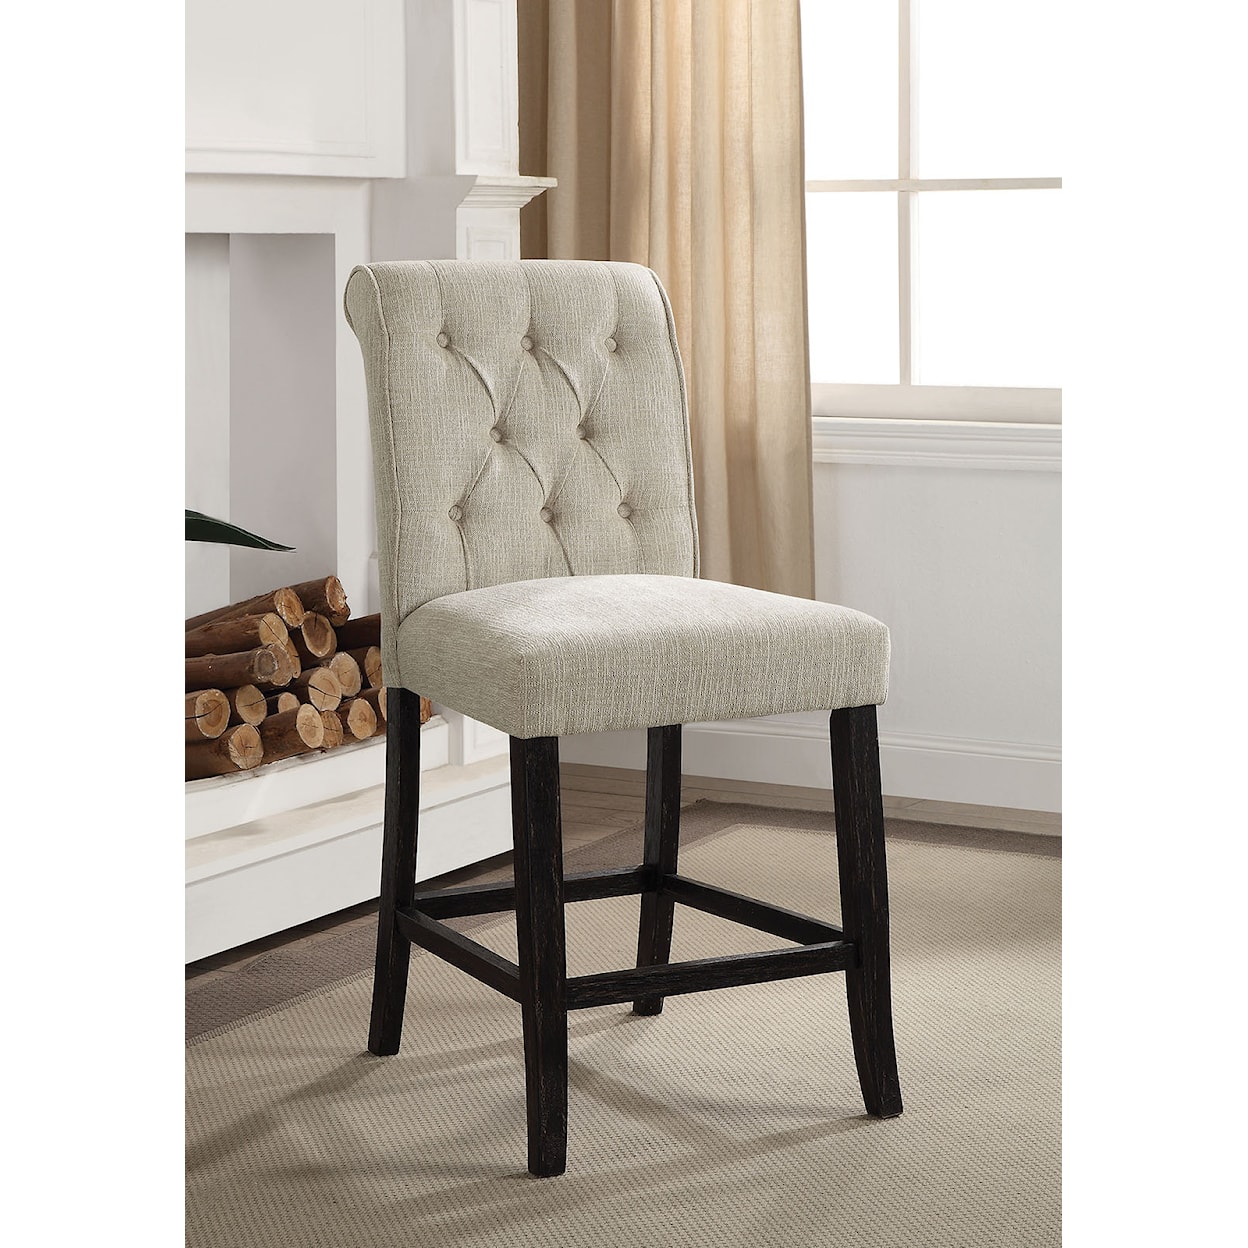 FUSA Izzy Counter Height Side Chair 2-Pack